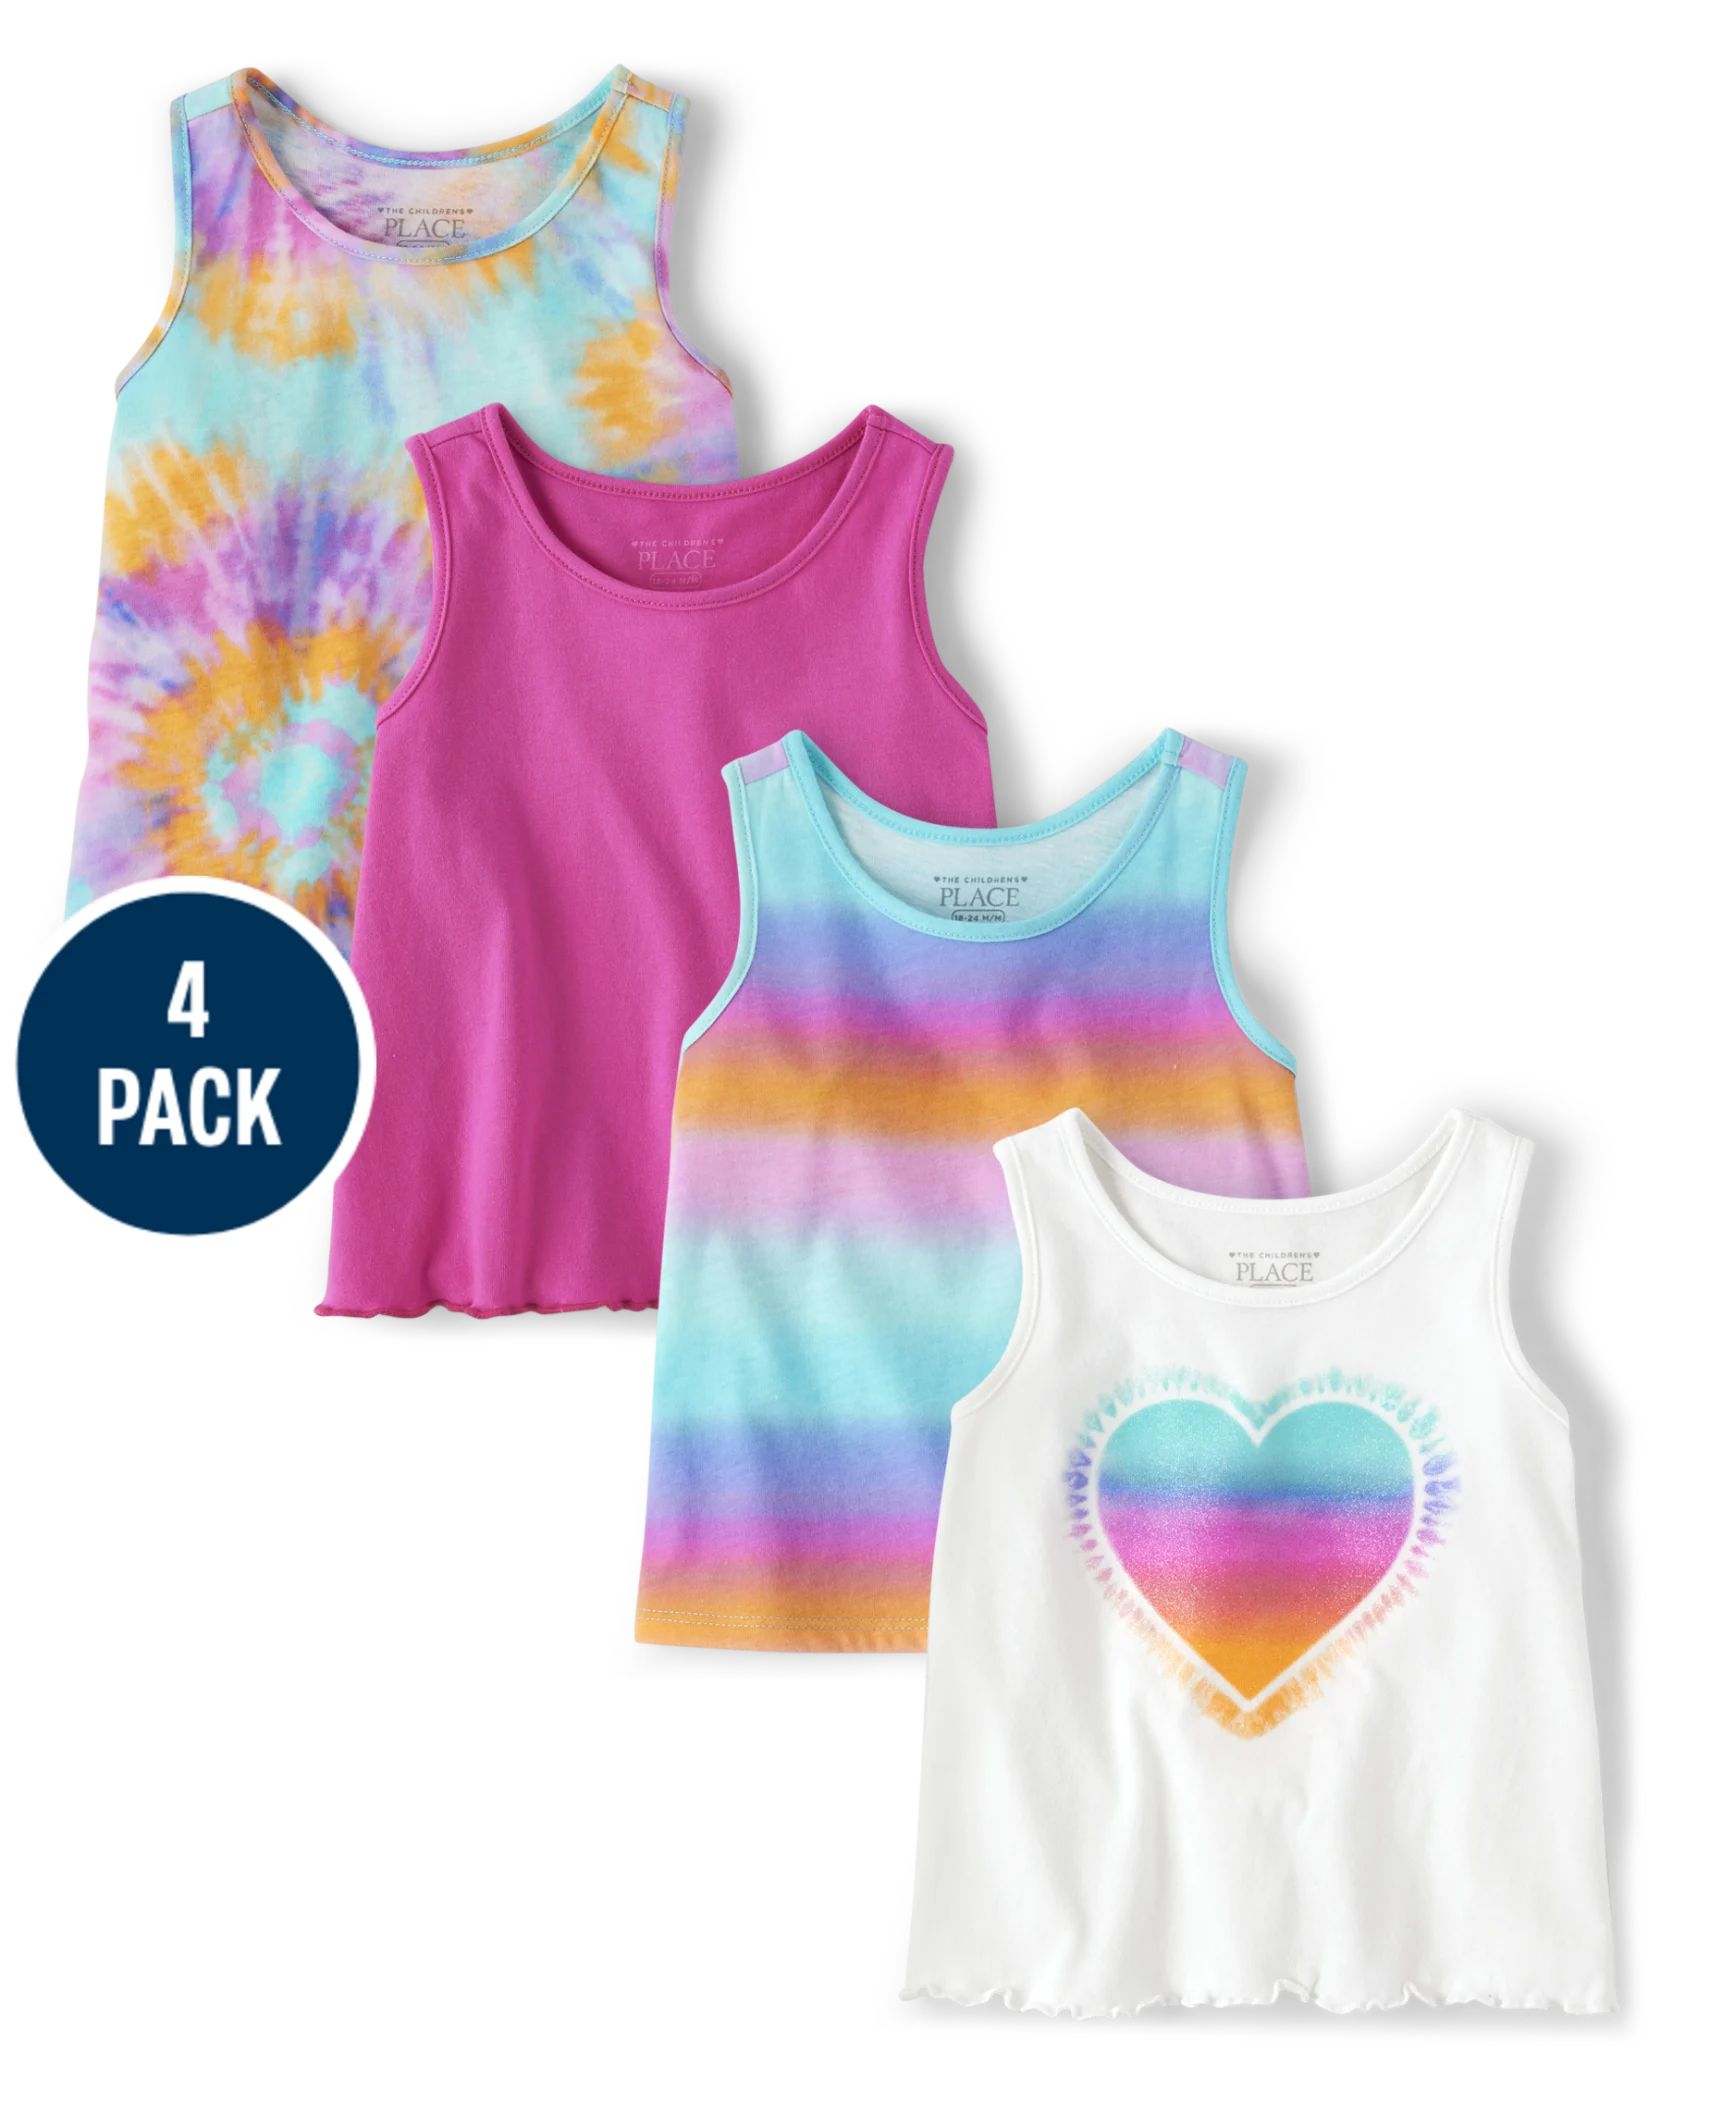 Toddler Girls Tie Dye Tank Top 4-Pack - blue radiance | The Children's Place